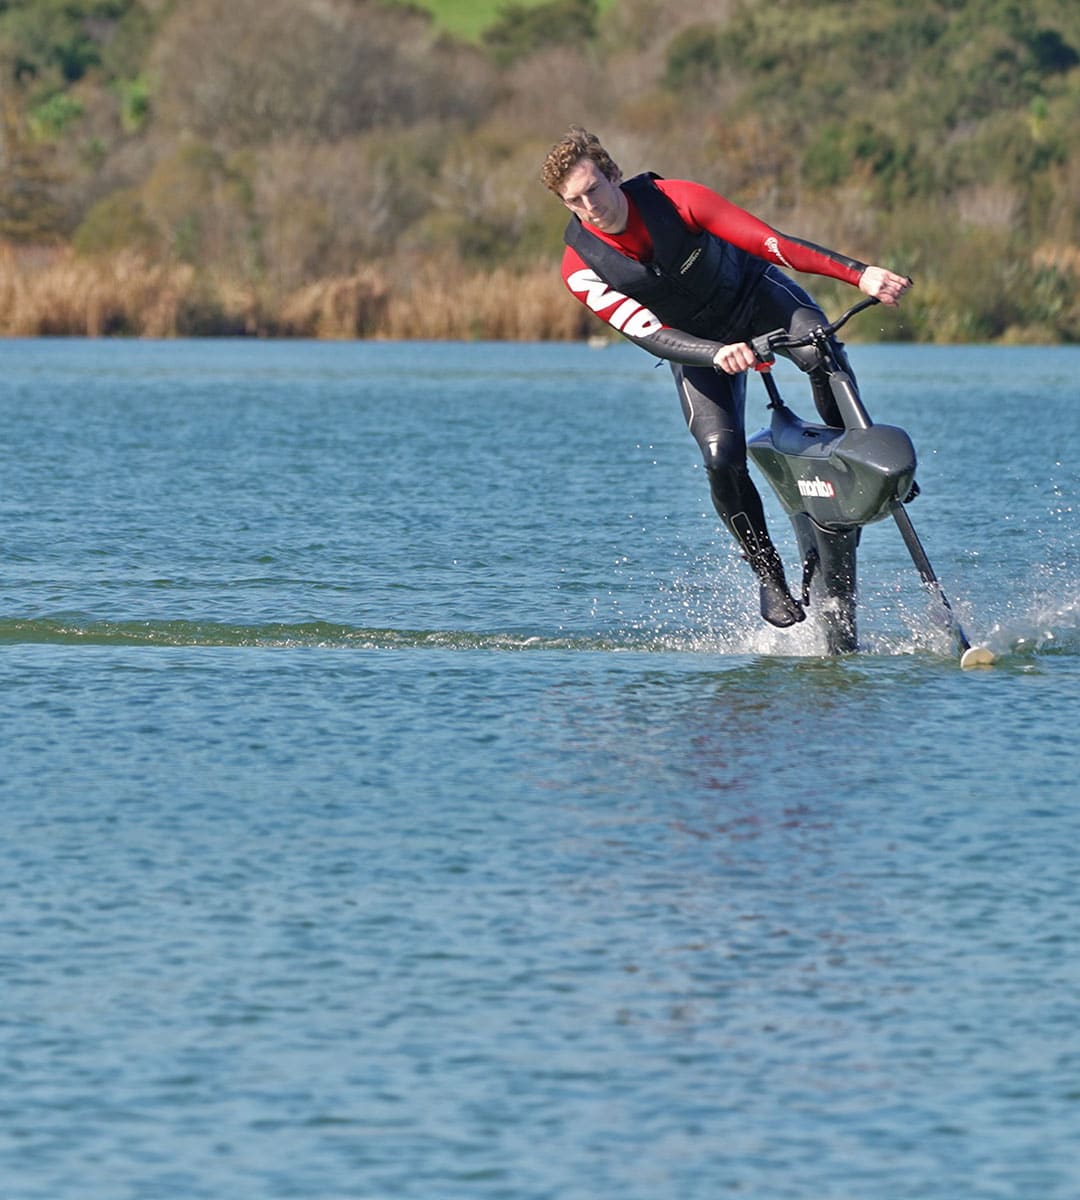 Man taking a turn while riding the hydrofoiler SL3  water bike on a lake